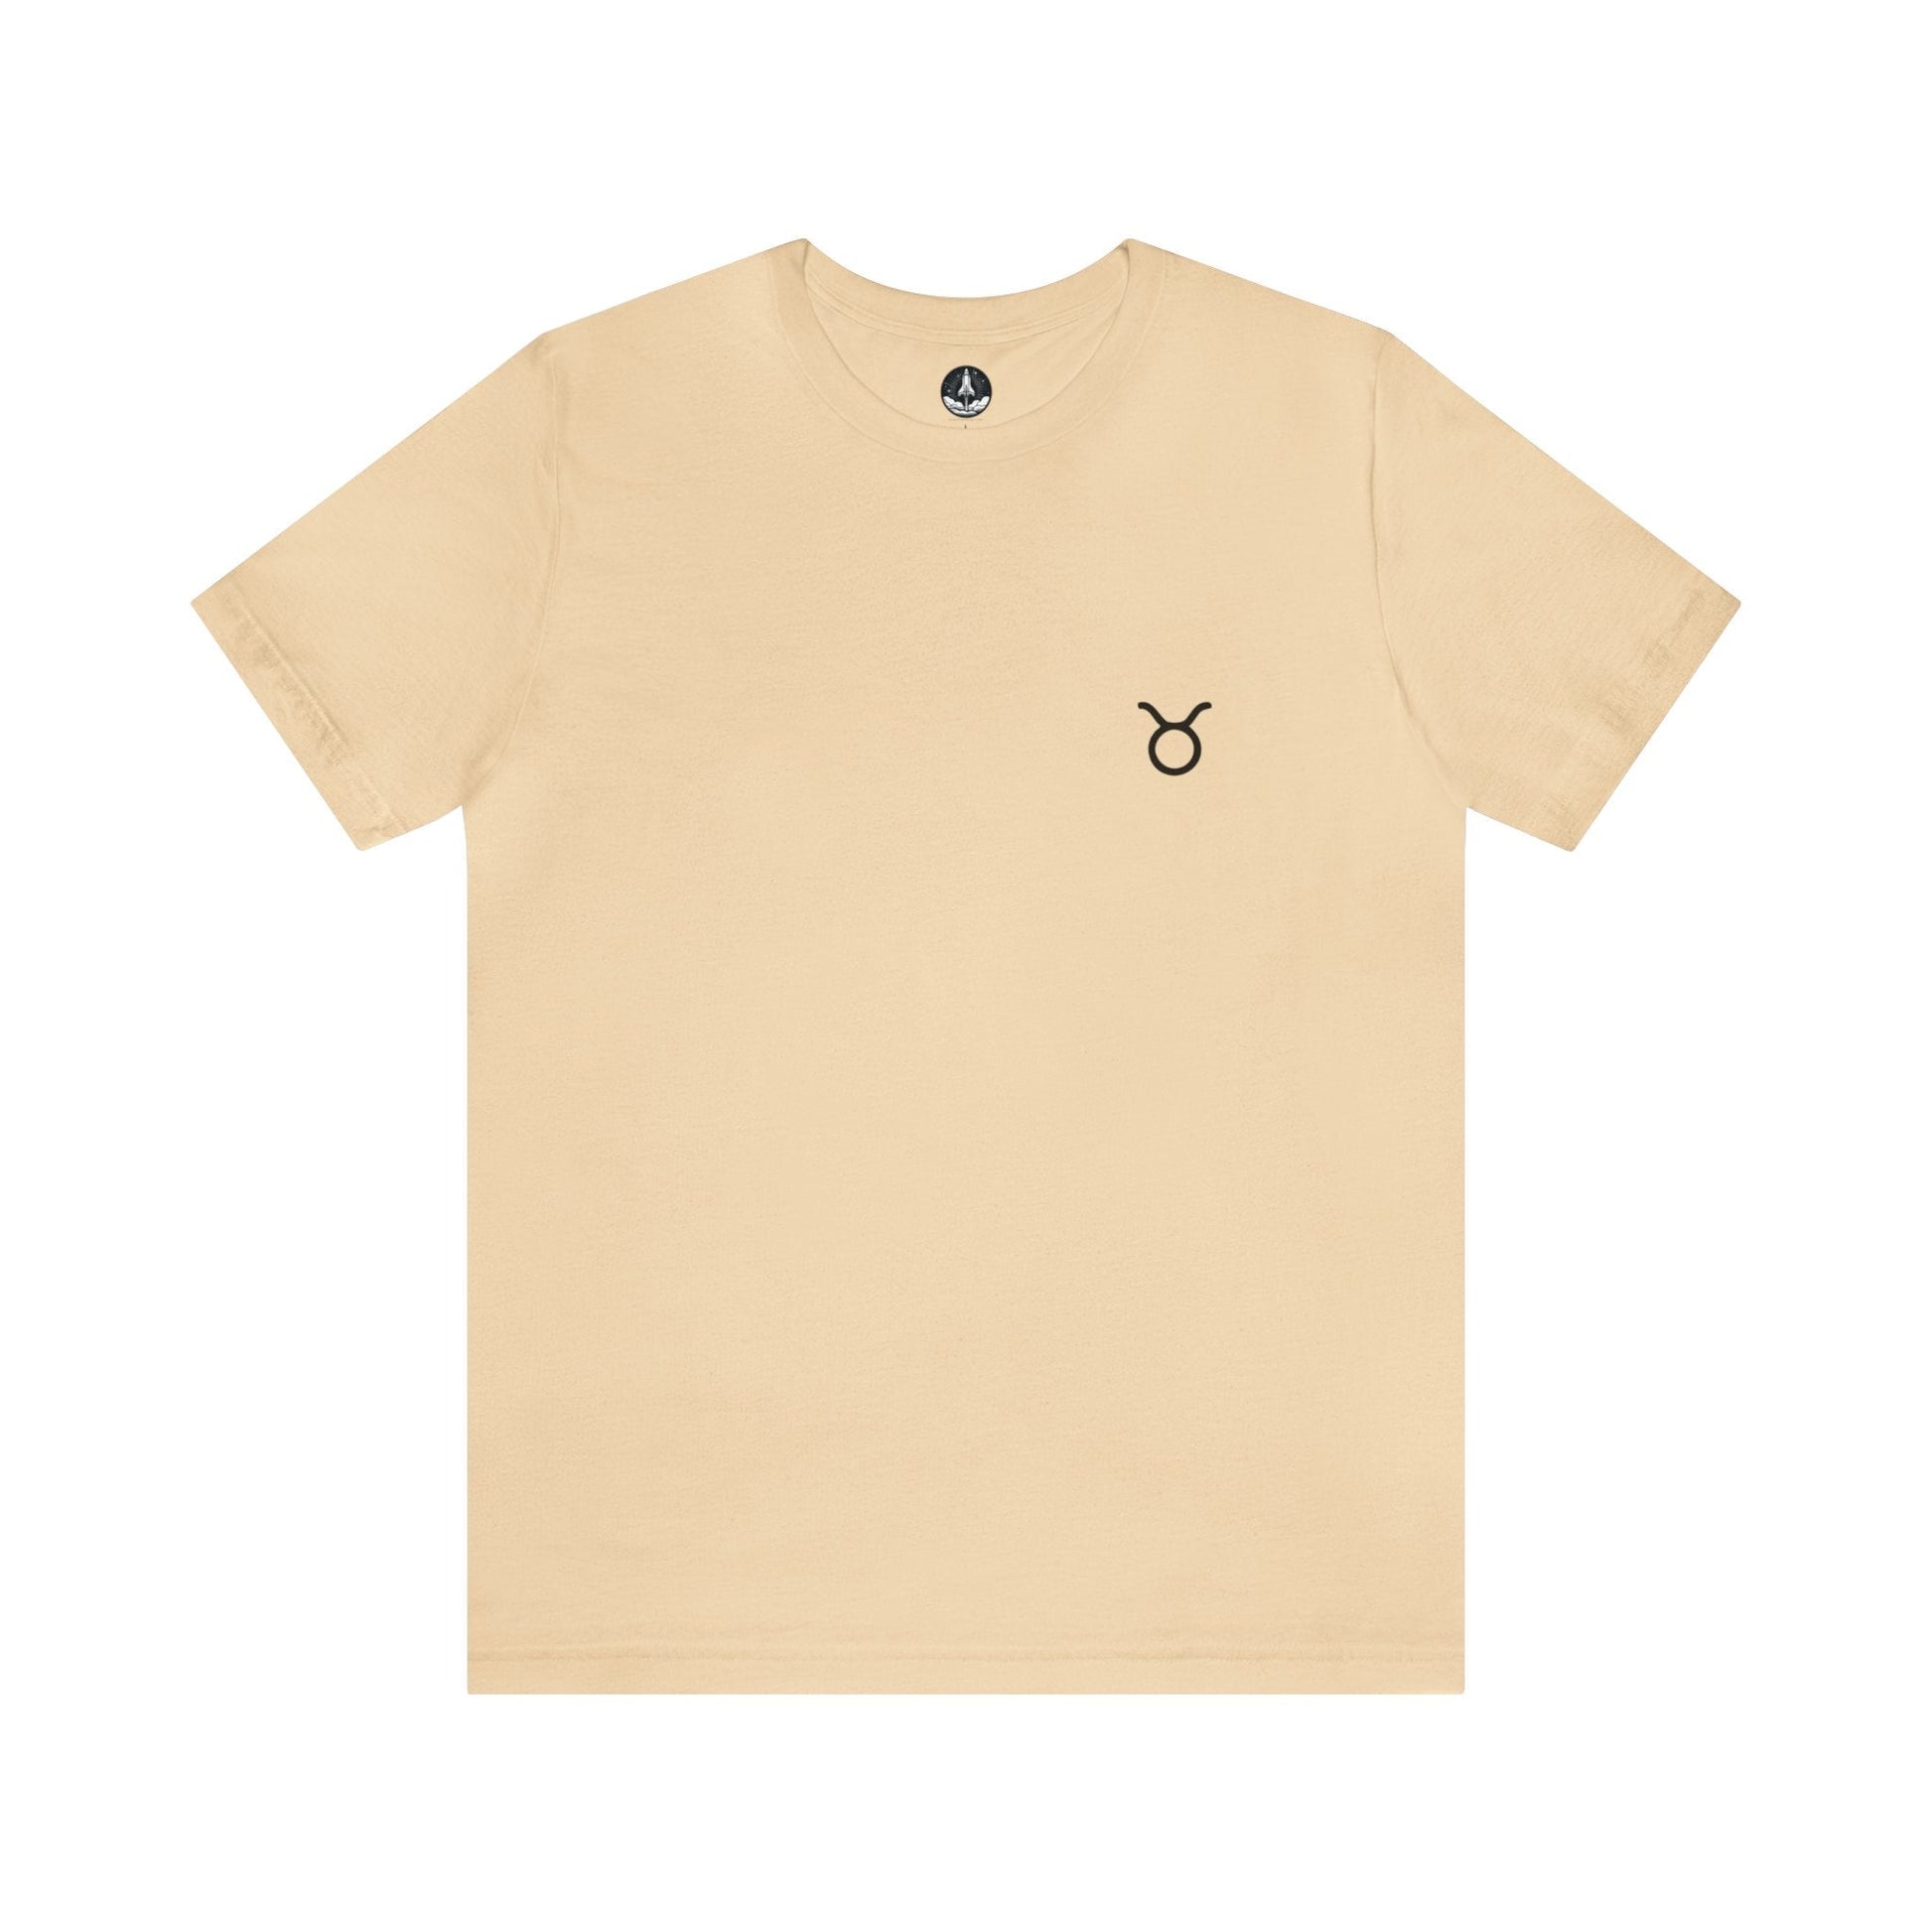 T-Shirt Soft Cream / S Taurus Zodiac Essence T-Shirt: Sophistication Meets Comfort for the Grounded Soul